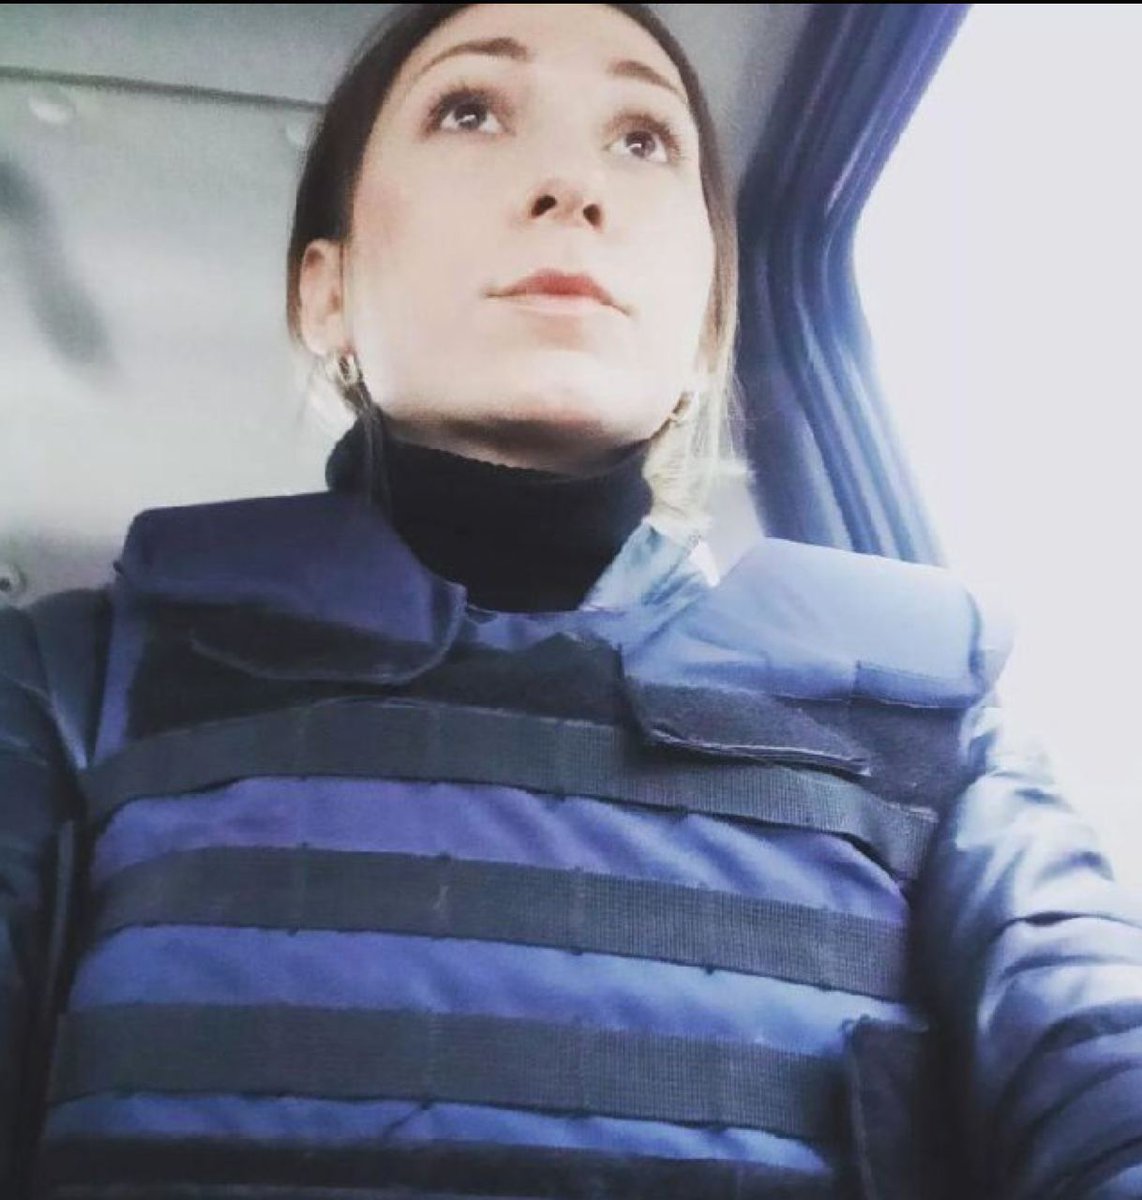 Hromadske: Our journalist Victoria Roshchyna is held captive by the Russian occupiers. She was reporting from hotspots in Eastern and Southern Ukraine since the beginning of the Russian-Ukrainian war. On March 12, we couldn't contact Victoria